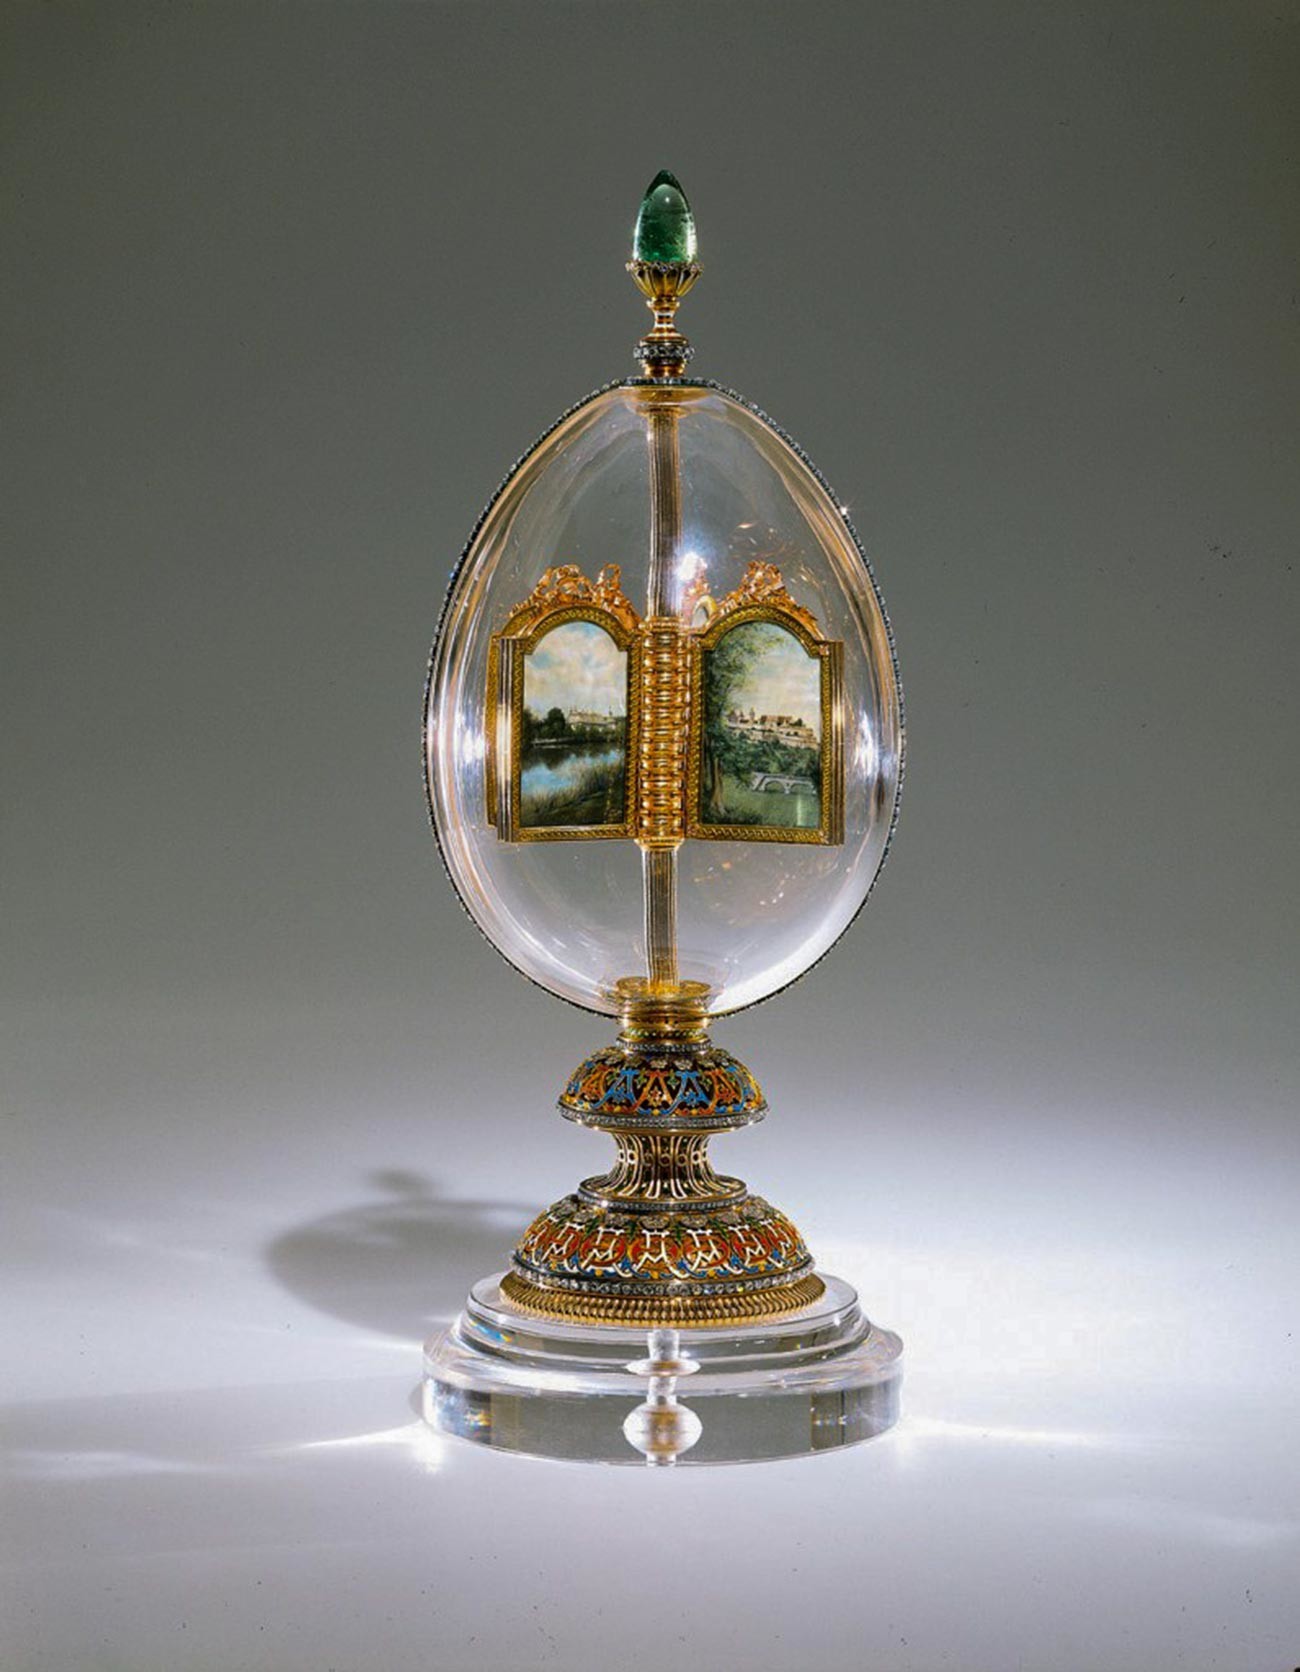 The Revolving Miniatures Faberge egg 